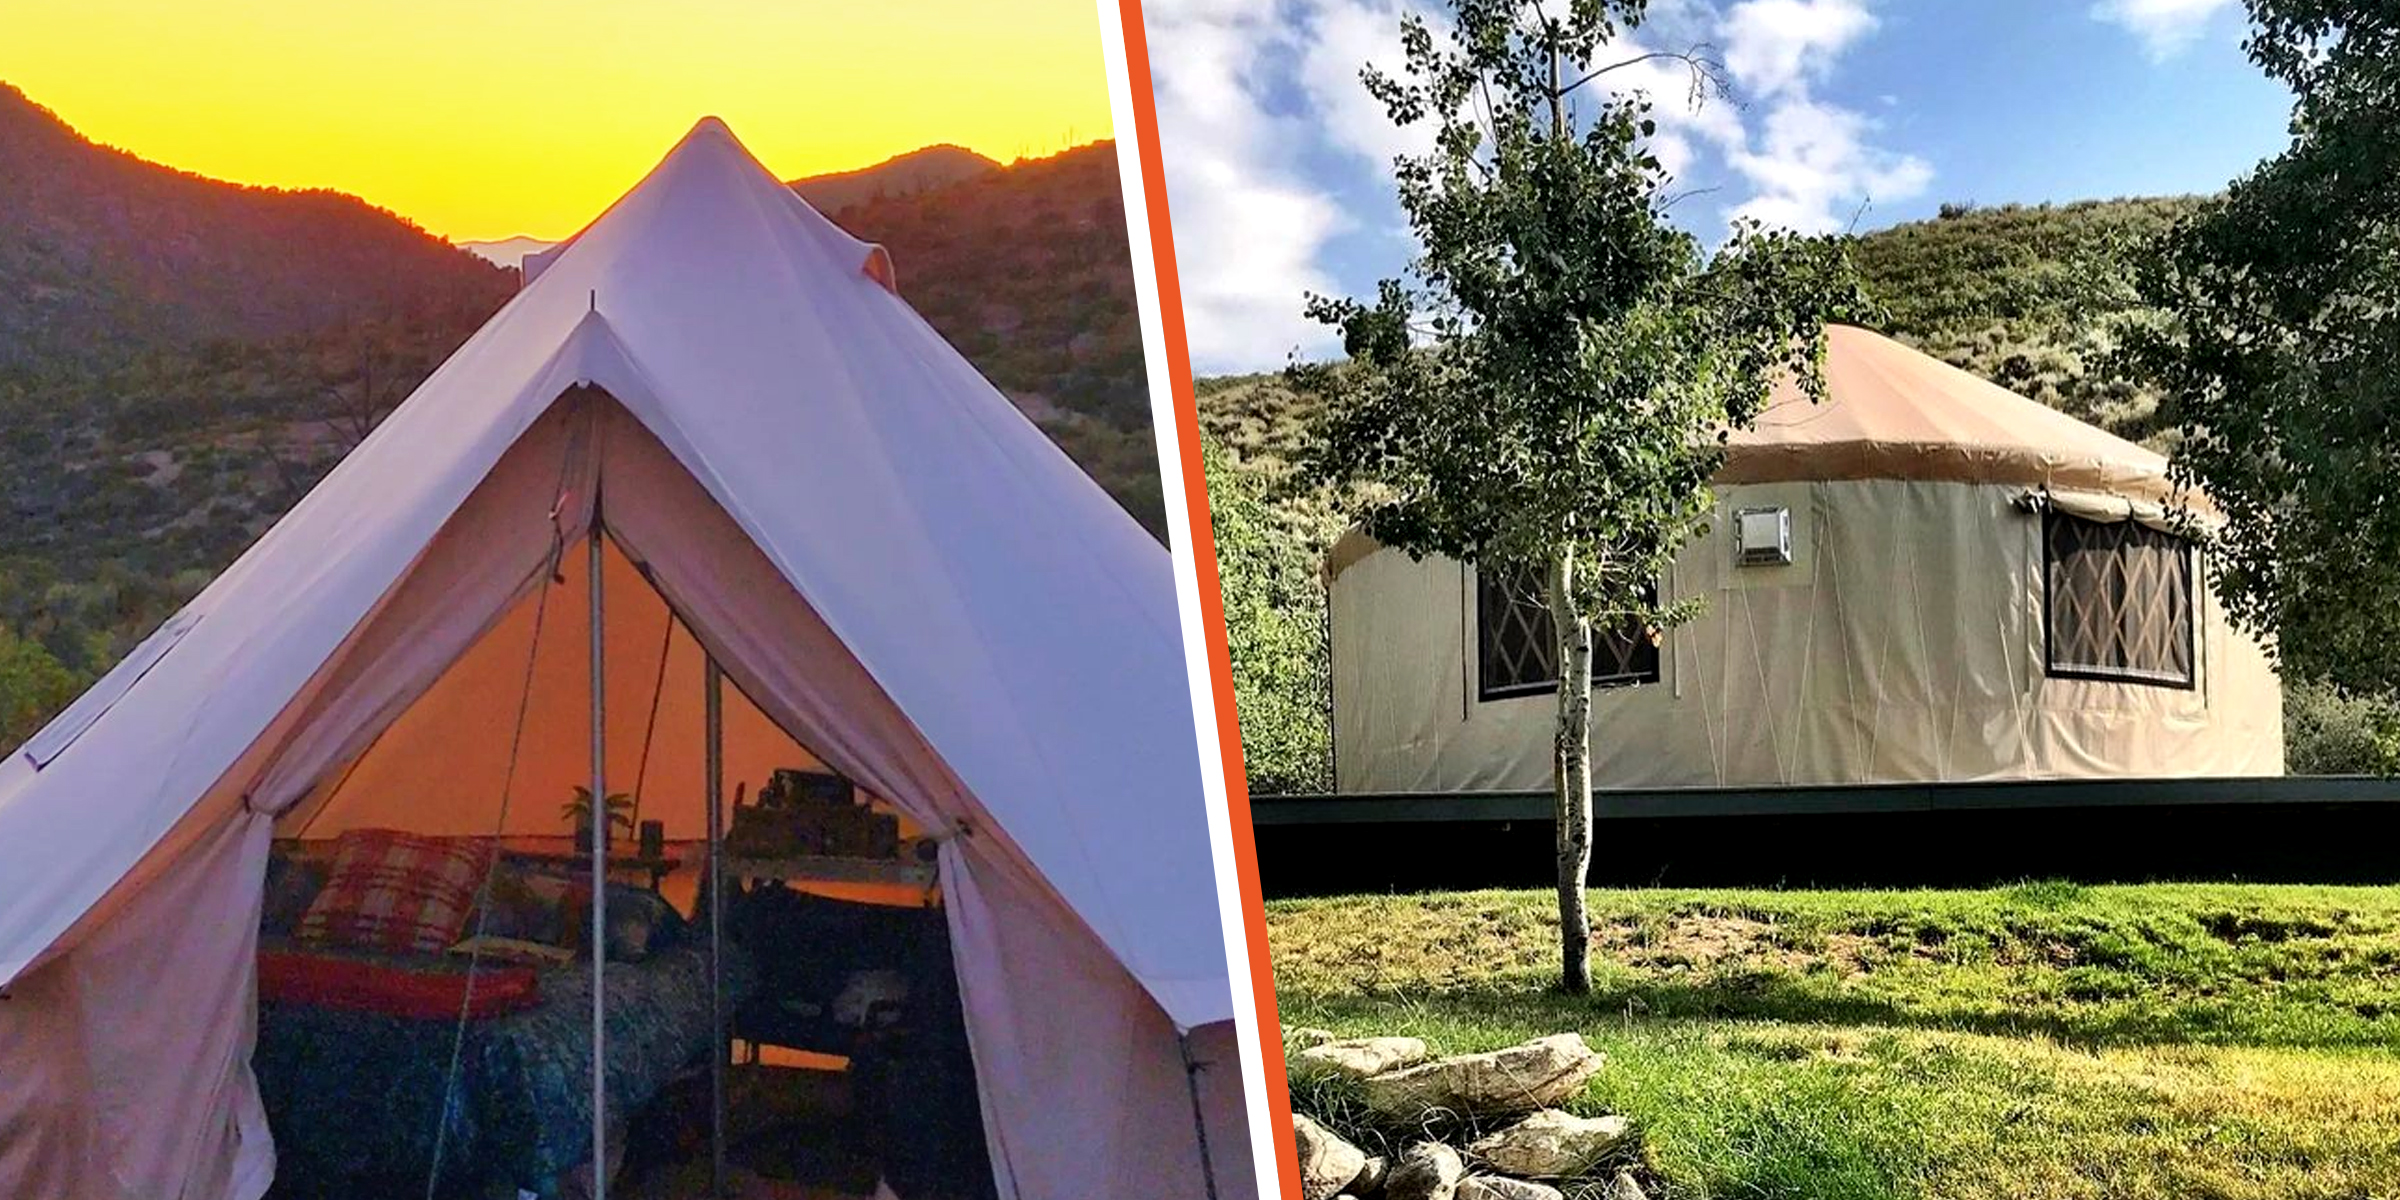 A mountainside tent at Glamping Adventures LV | The Conrad Creek Yurt at the Ruby 360 Lodge | Source: Instagram/glamping.adventures | Instagram/ruby360lodge